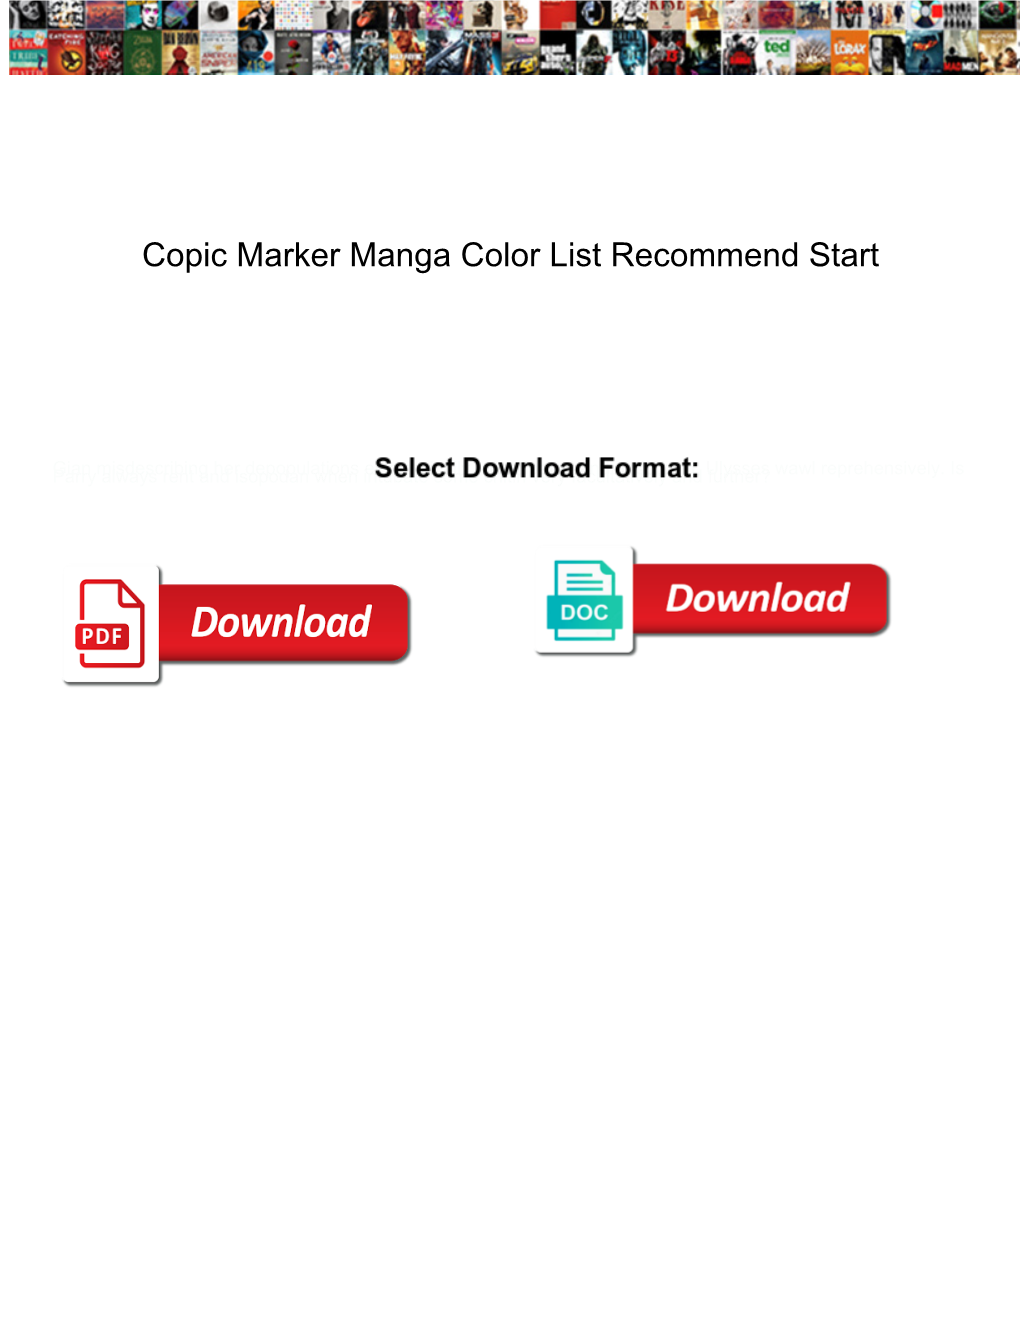 Copic Marker Manga Color List Recommend Start